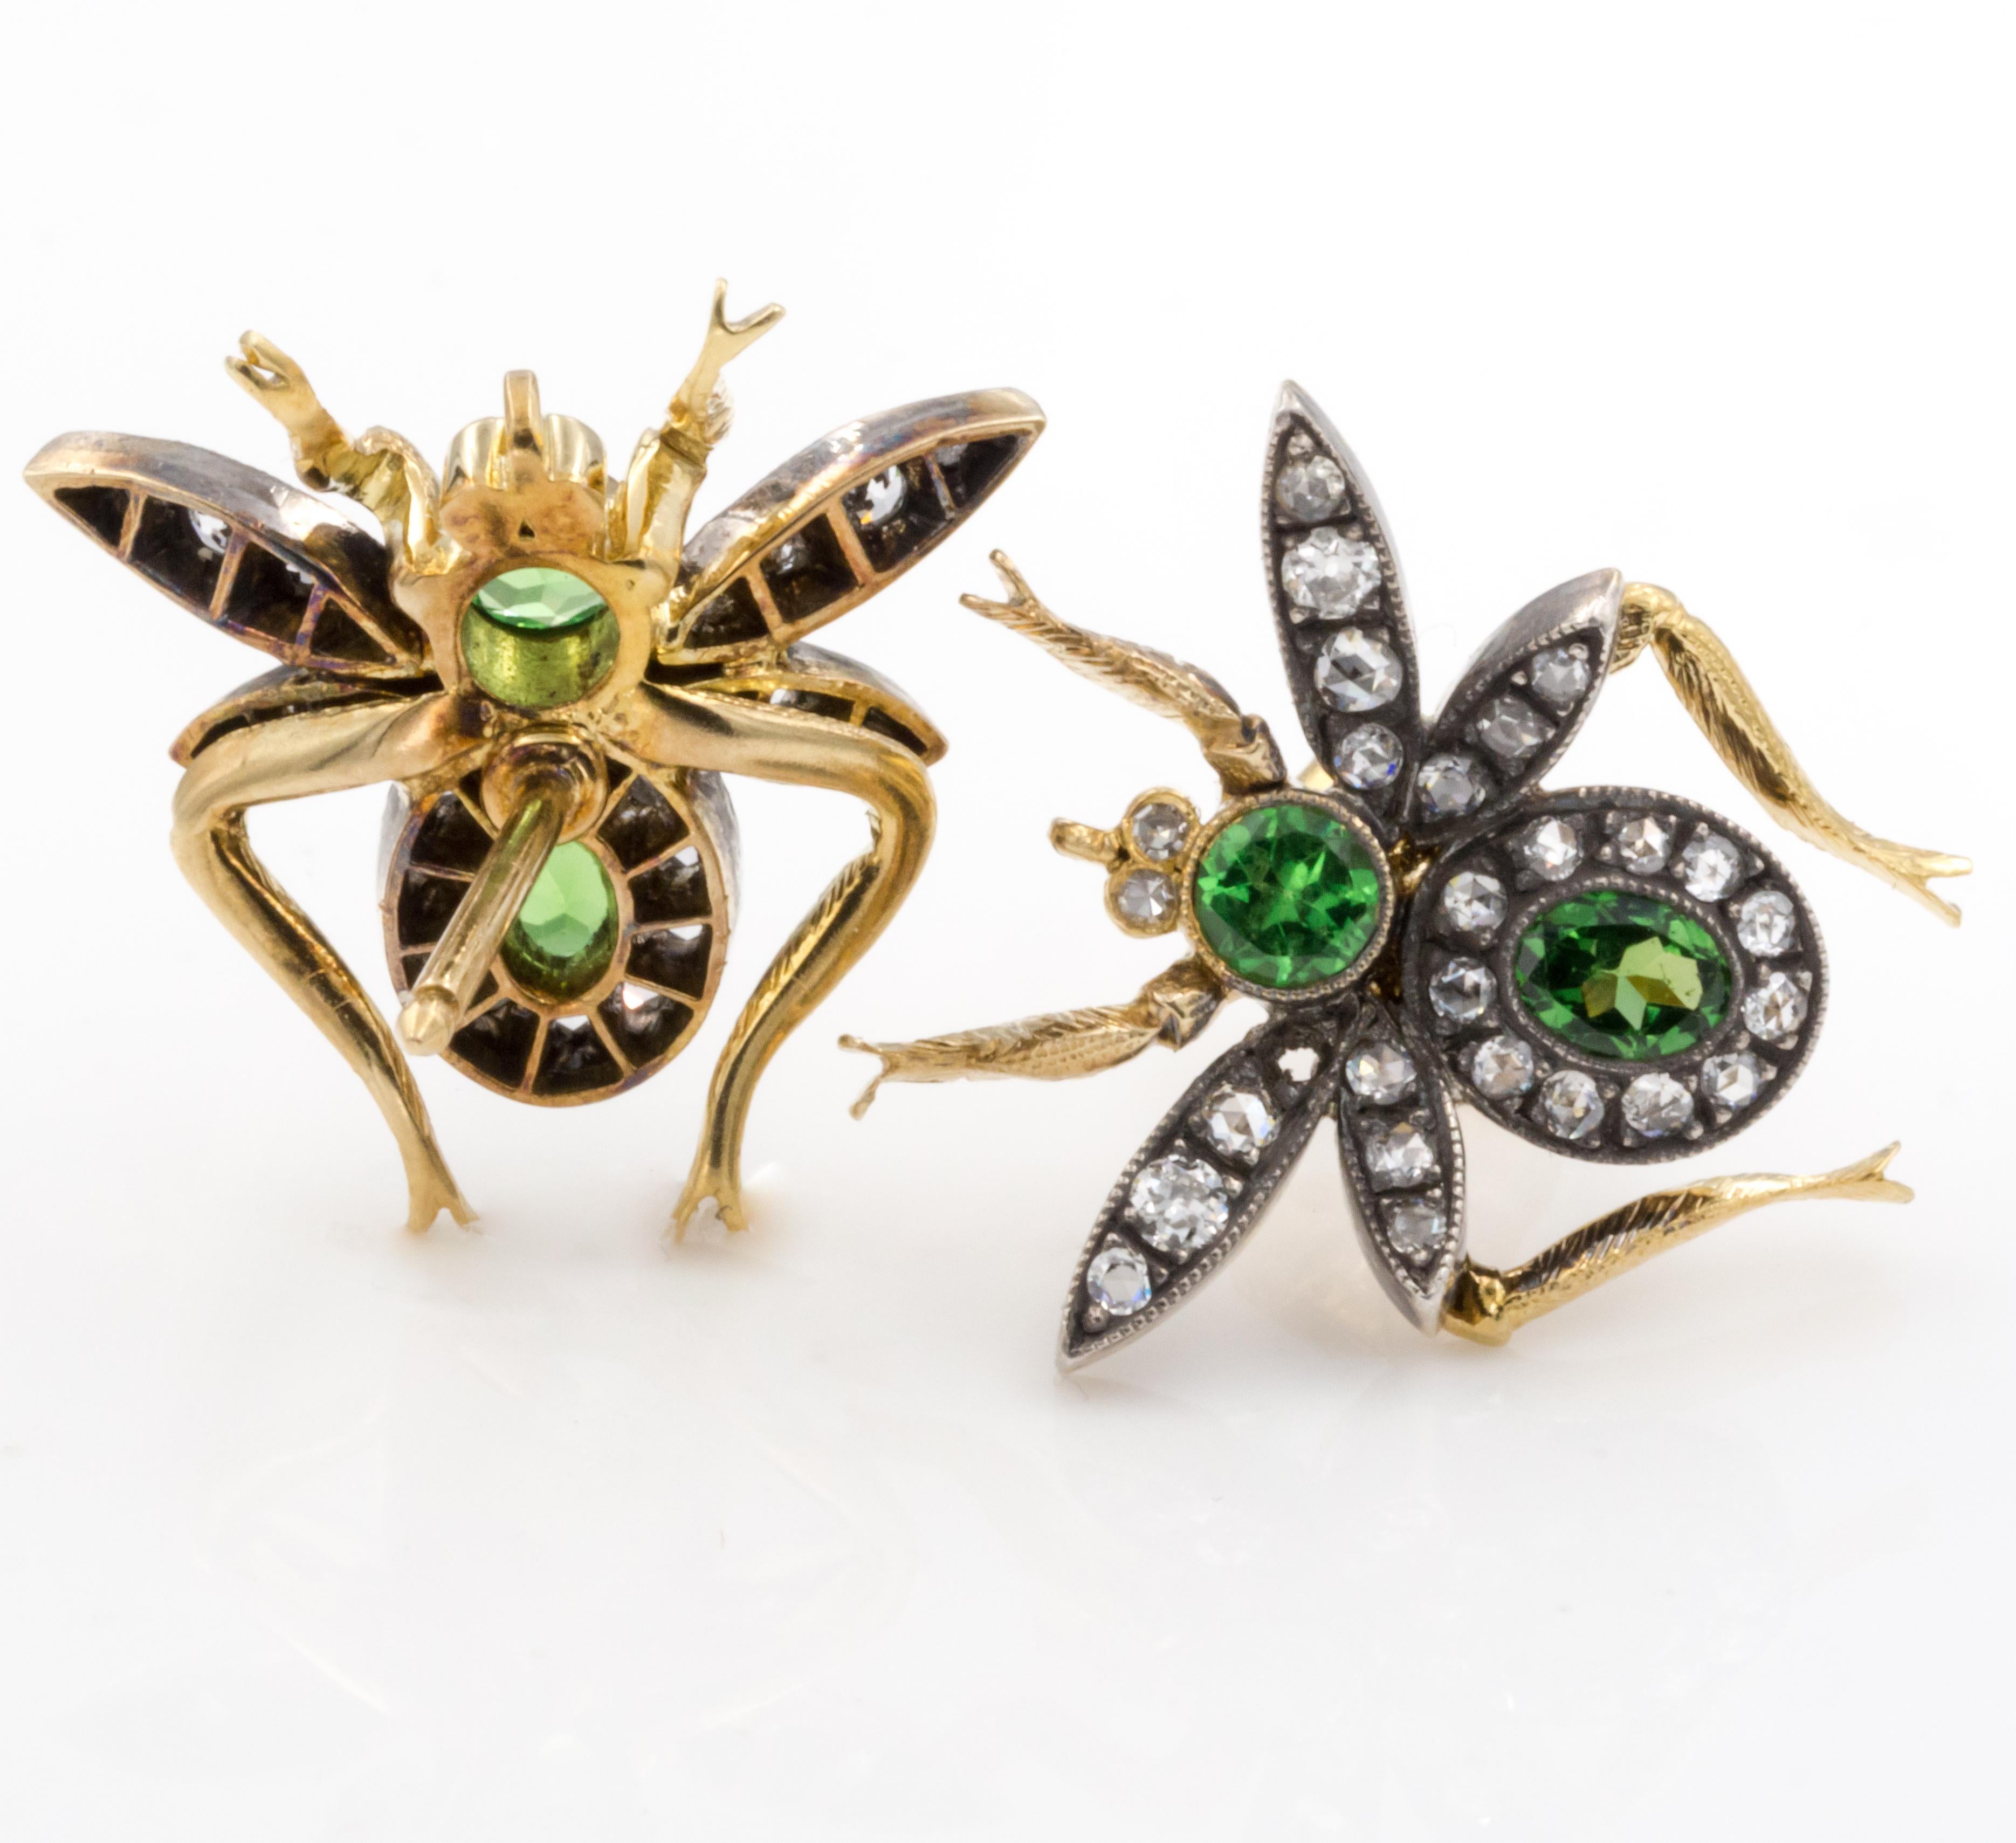 These whimsical fly stud earrings are set with diamonds and green garnets in 18k yellow gold topped with antiqued silver giving it the beautiful vintage look.

Diamond: 0.72ct
Green Garnets: 1.09ct
Metal: 18k Yellow Gold, Silver
Dimensions: 0.75 in